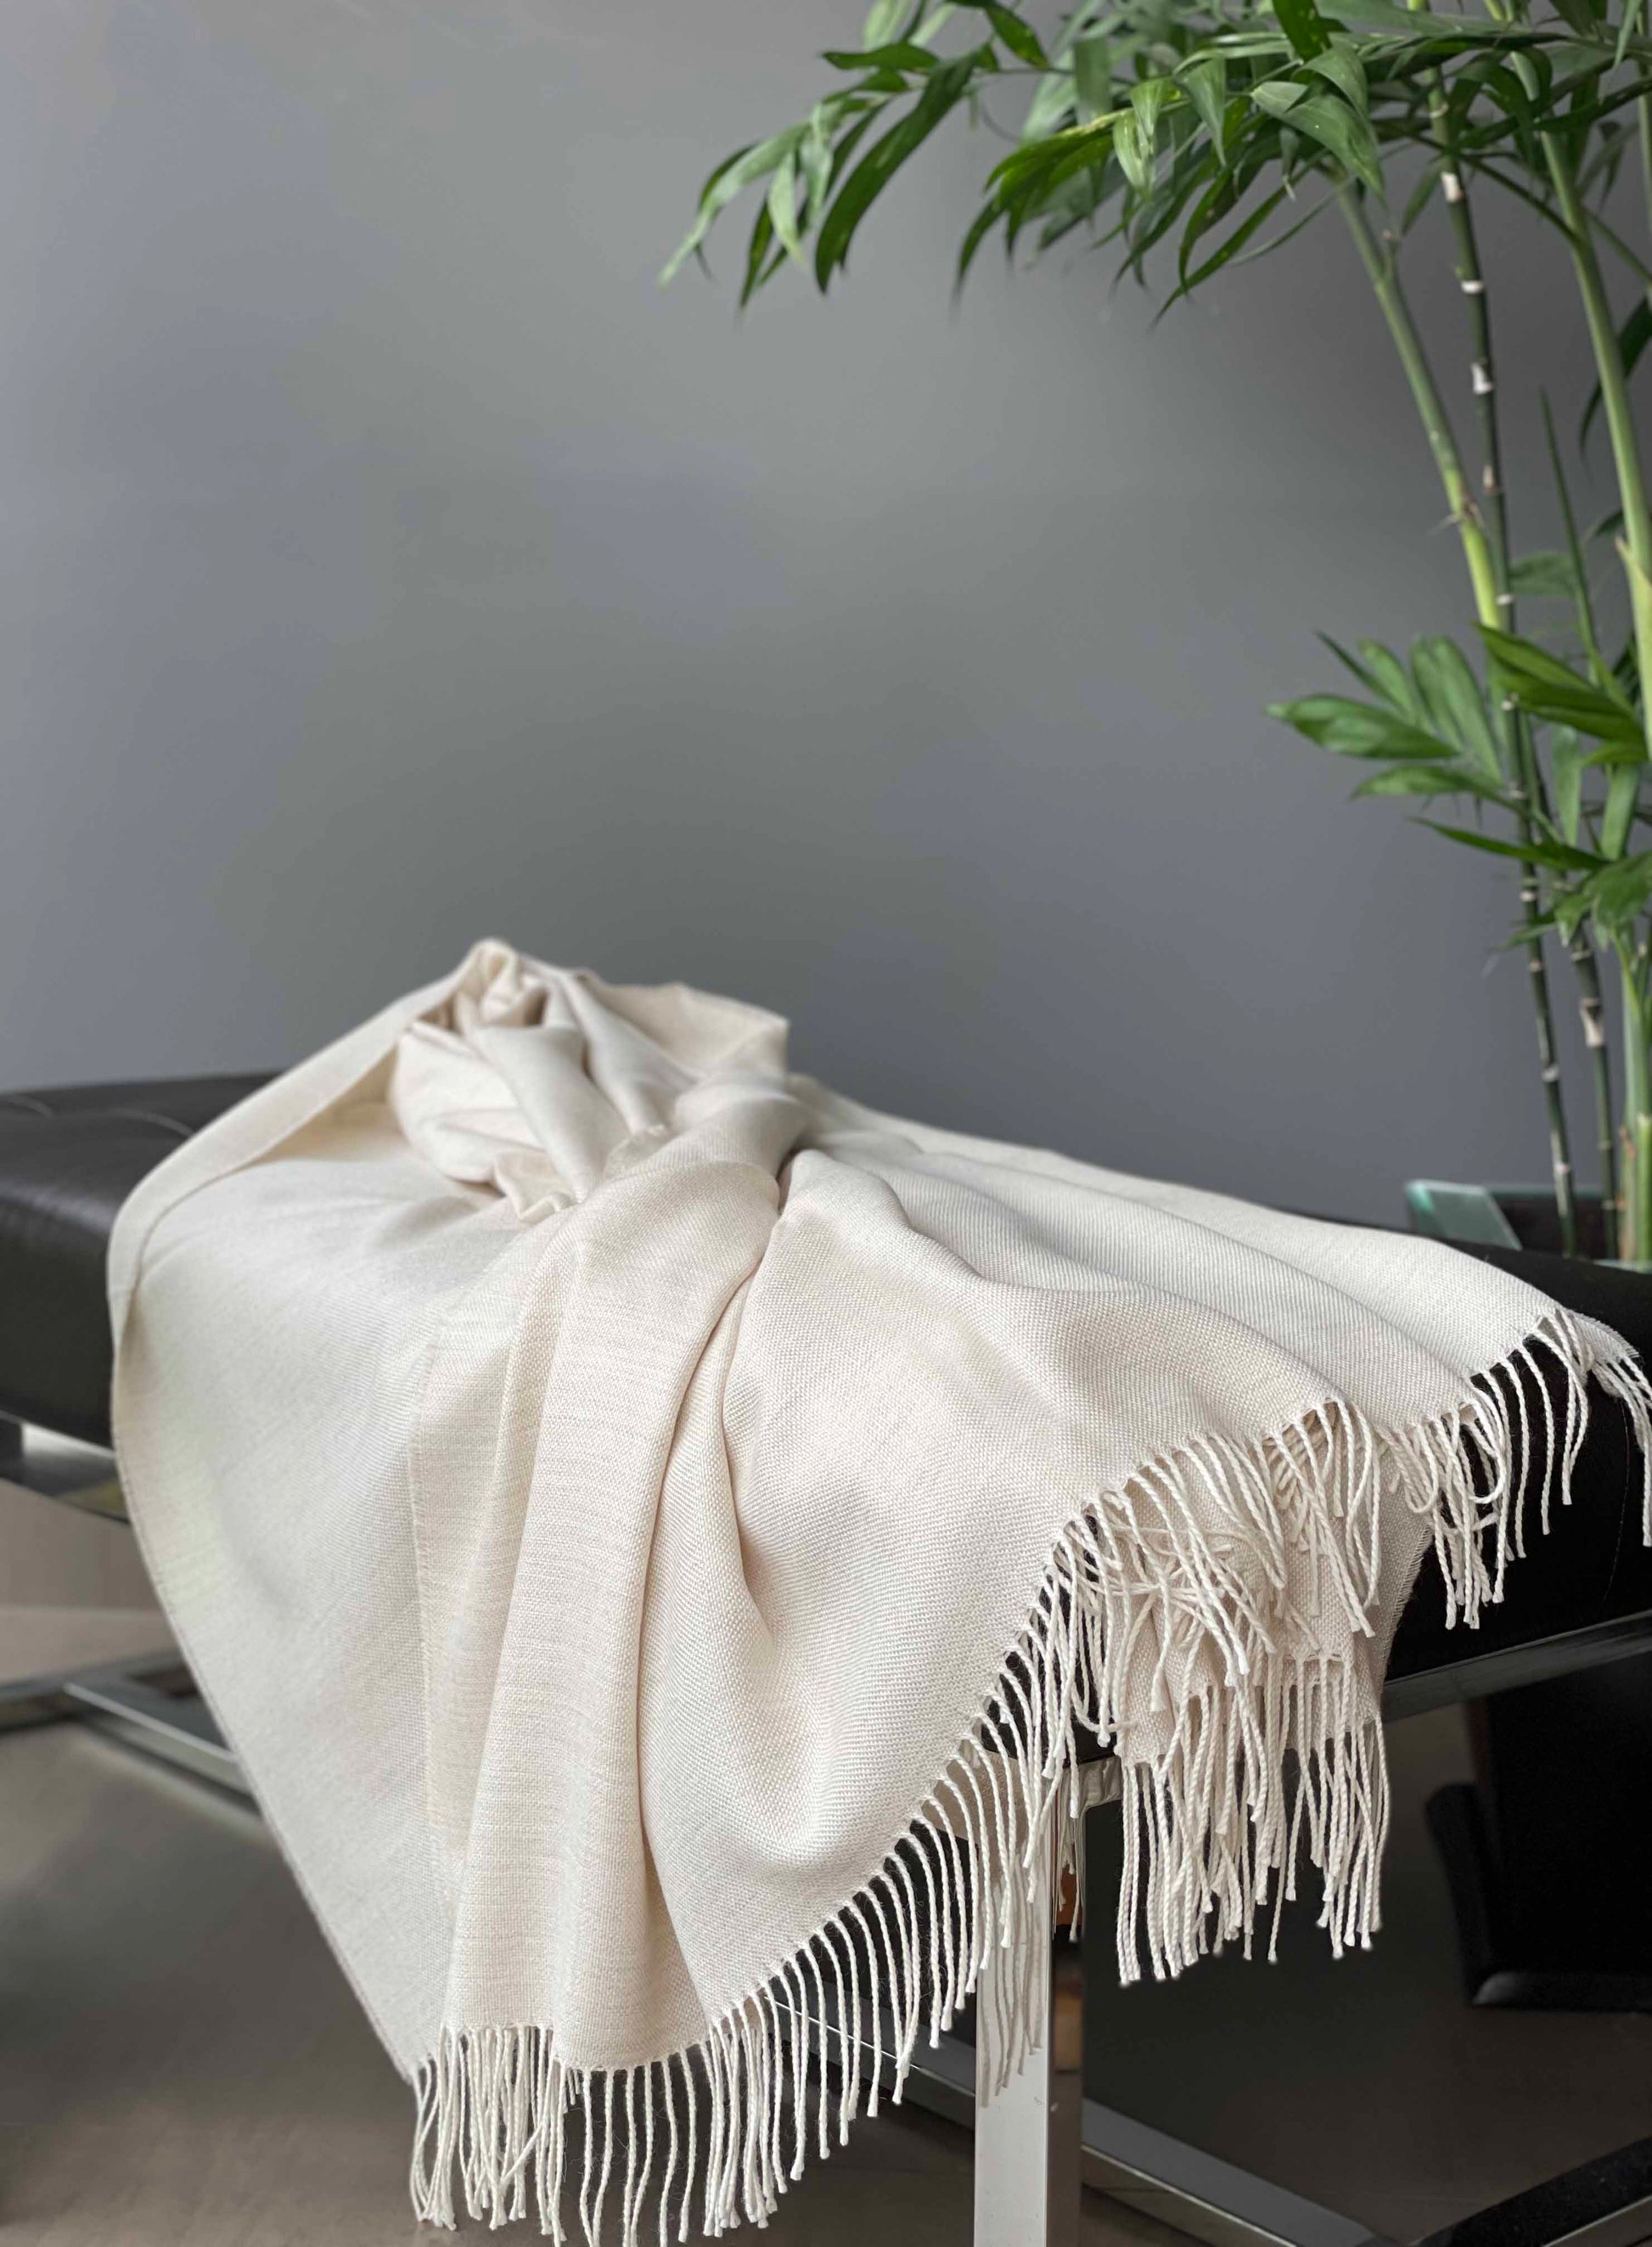 Blanket from alpaca wool in off-white color